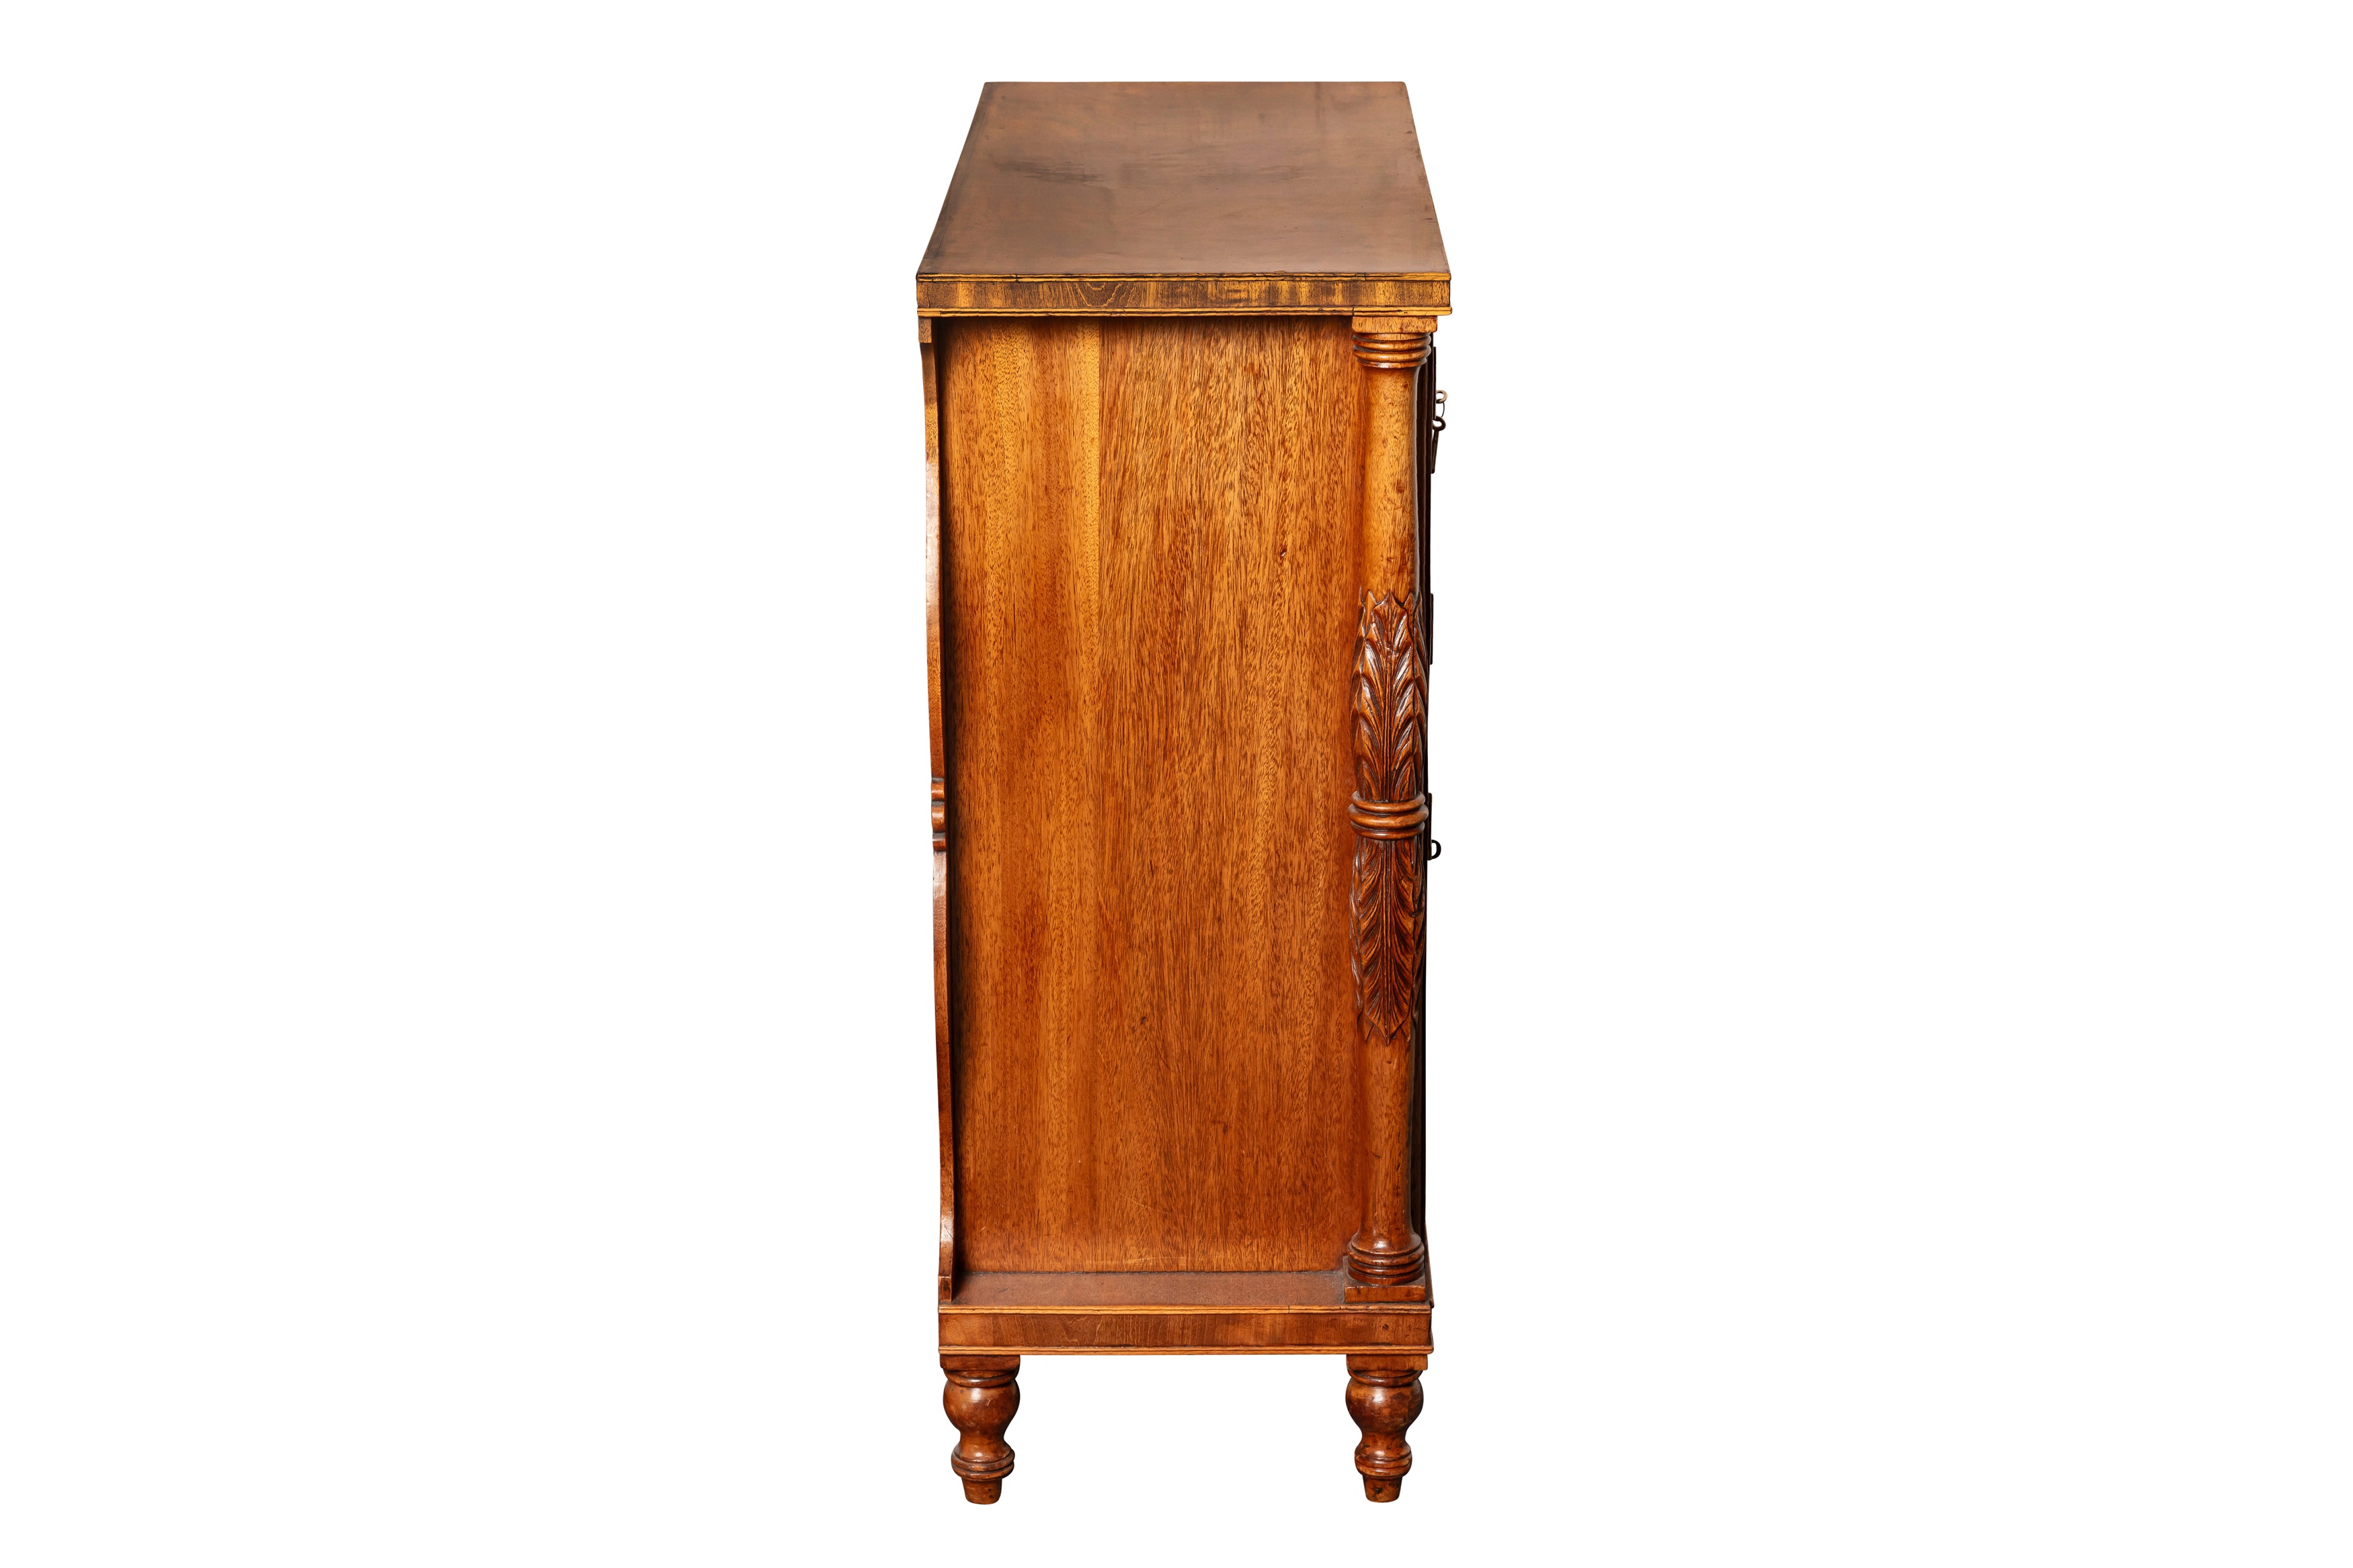 A REGENCY STYLE MAHOGANY SIDE CABINET, 19TH CENTURY - Image 2 of 4